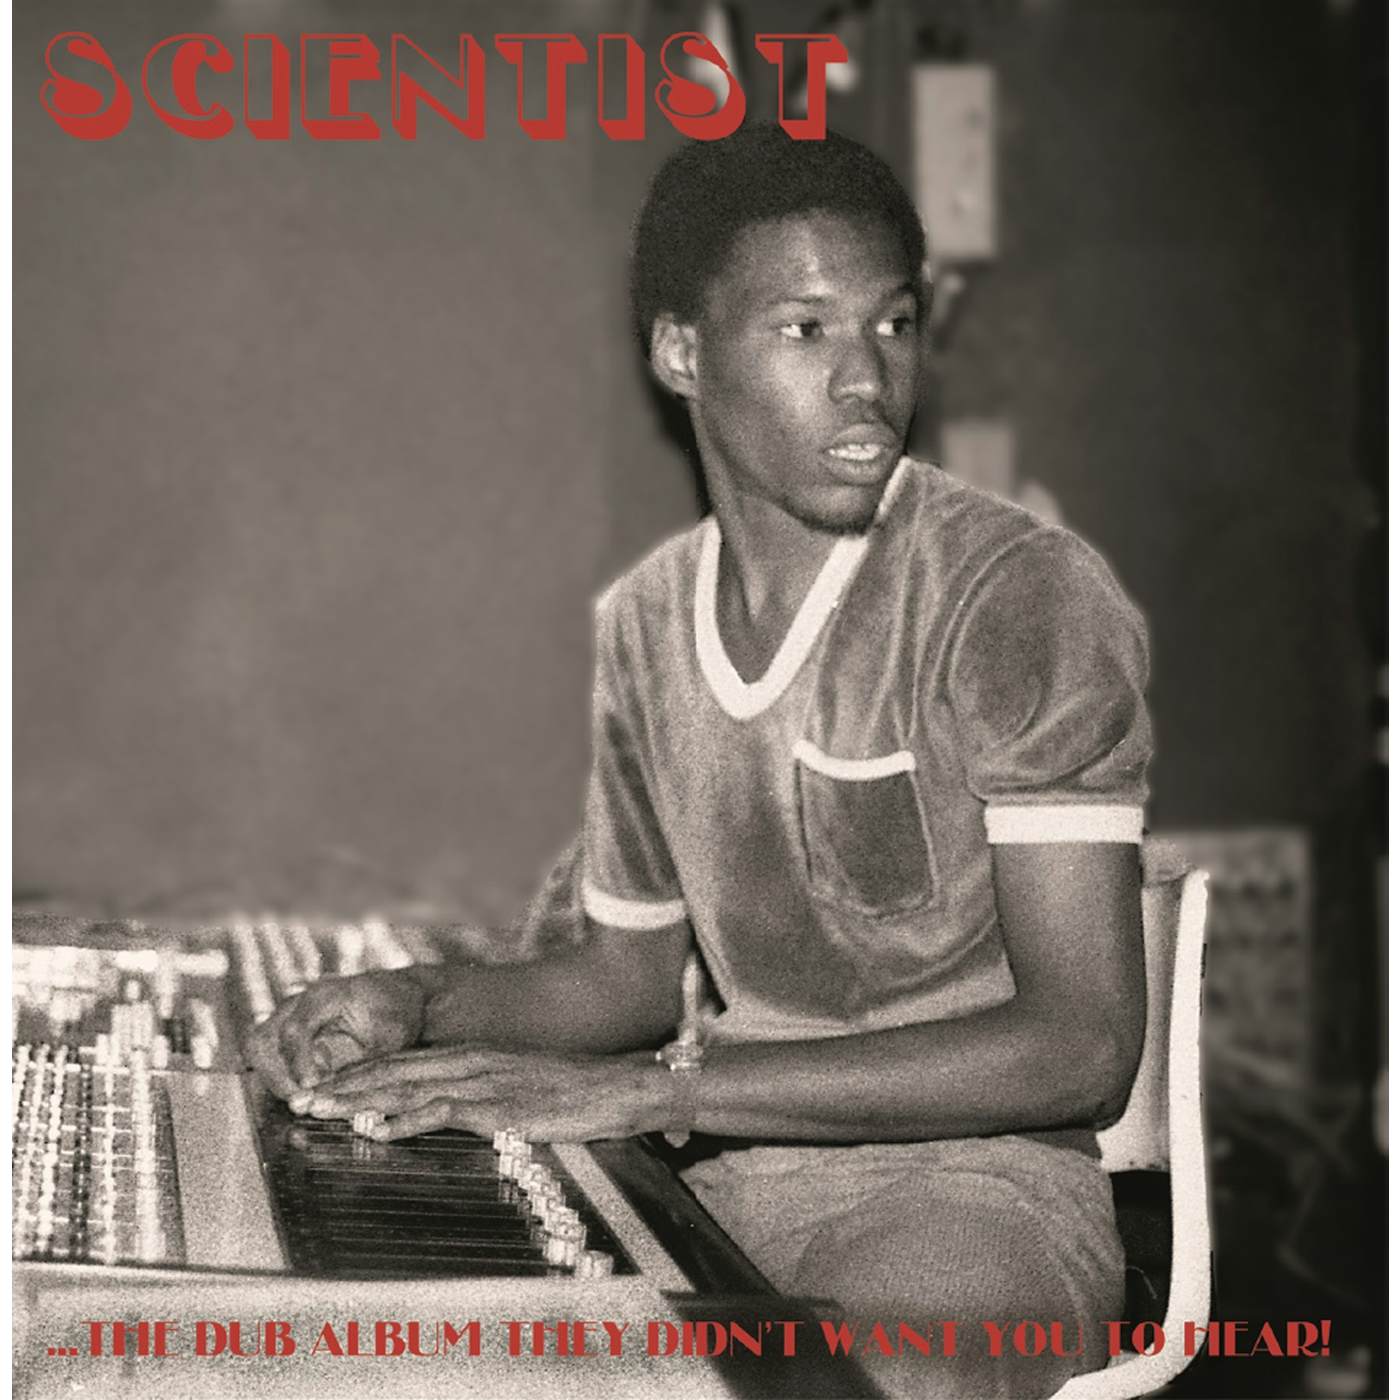 Scientist DUB ALBUM THEY DIDN'T WANT YOU TO HEAR Vinyl Record